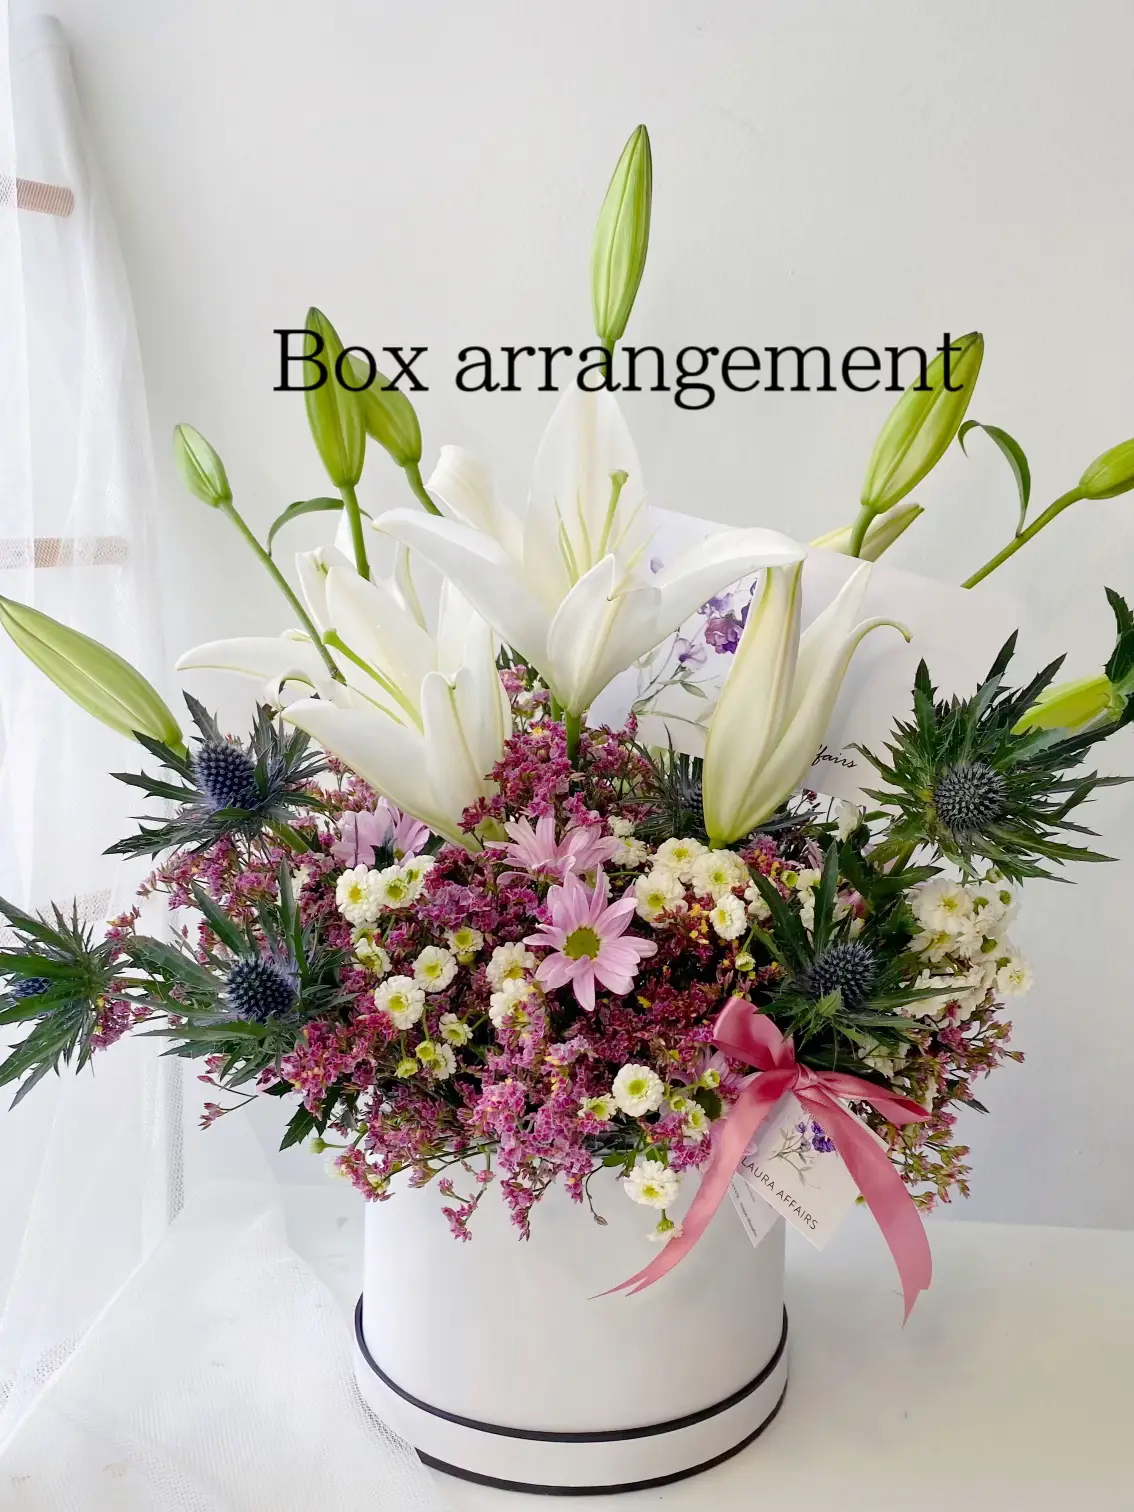 Flower bouquet ideas, Gallery posted by Cerita_opah